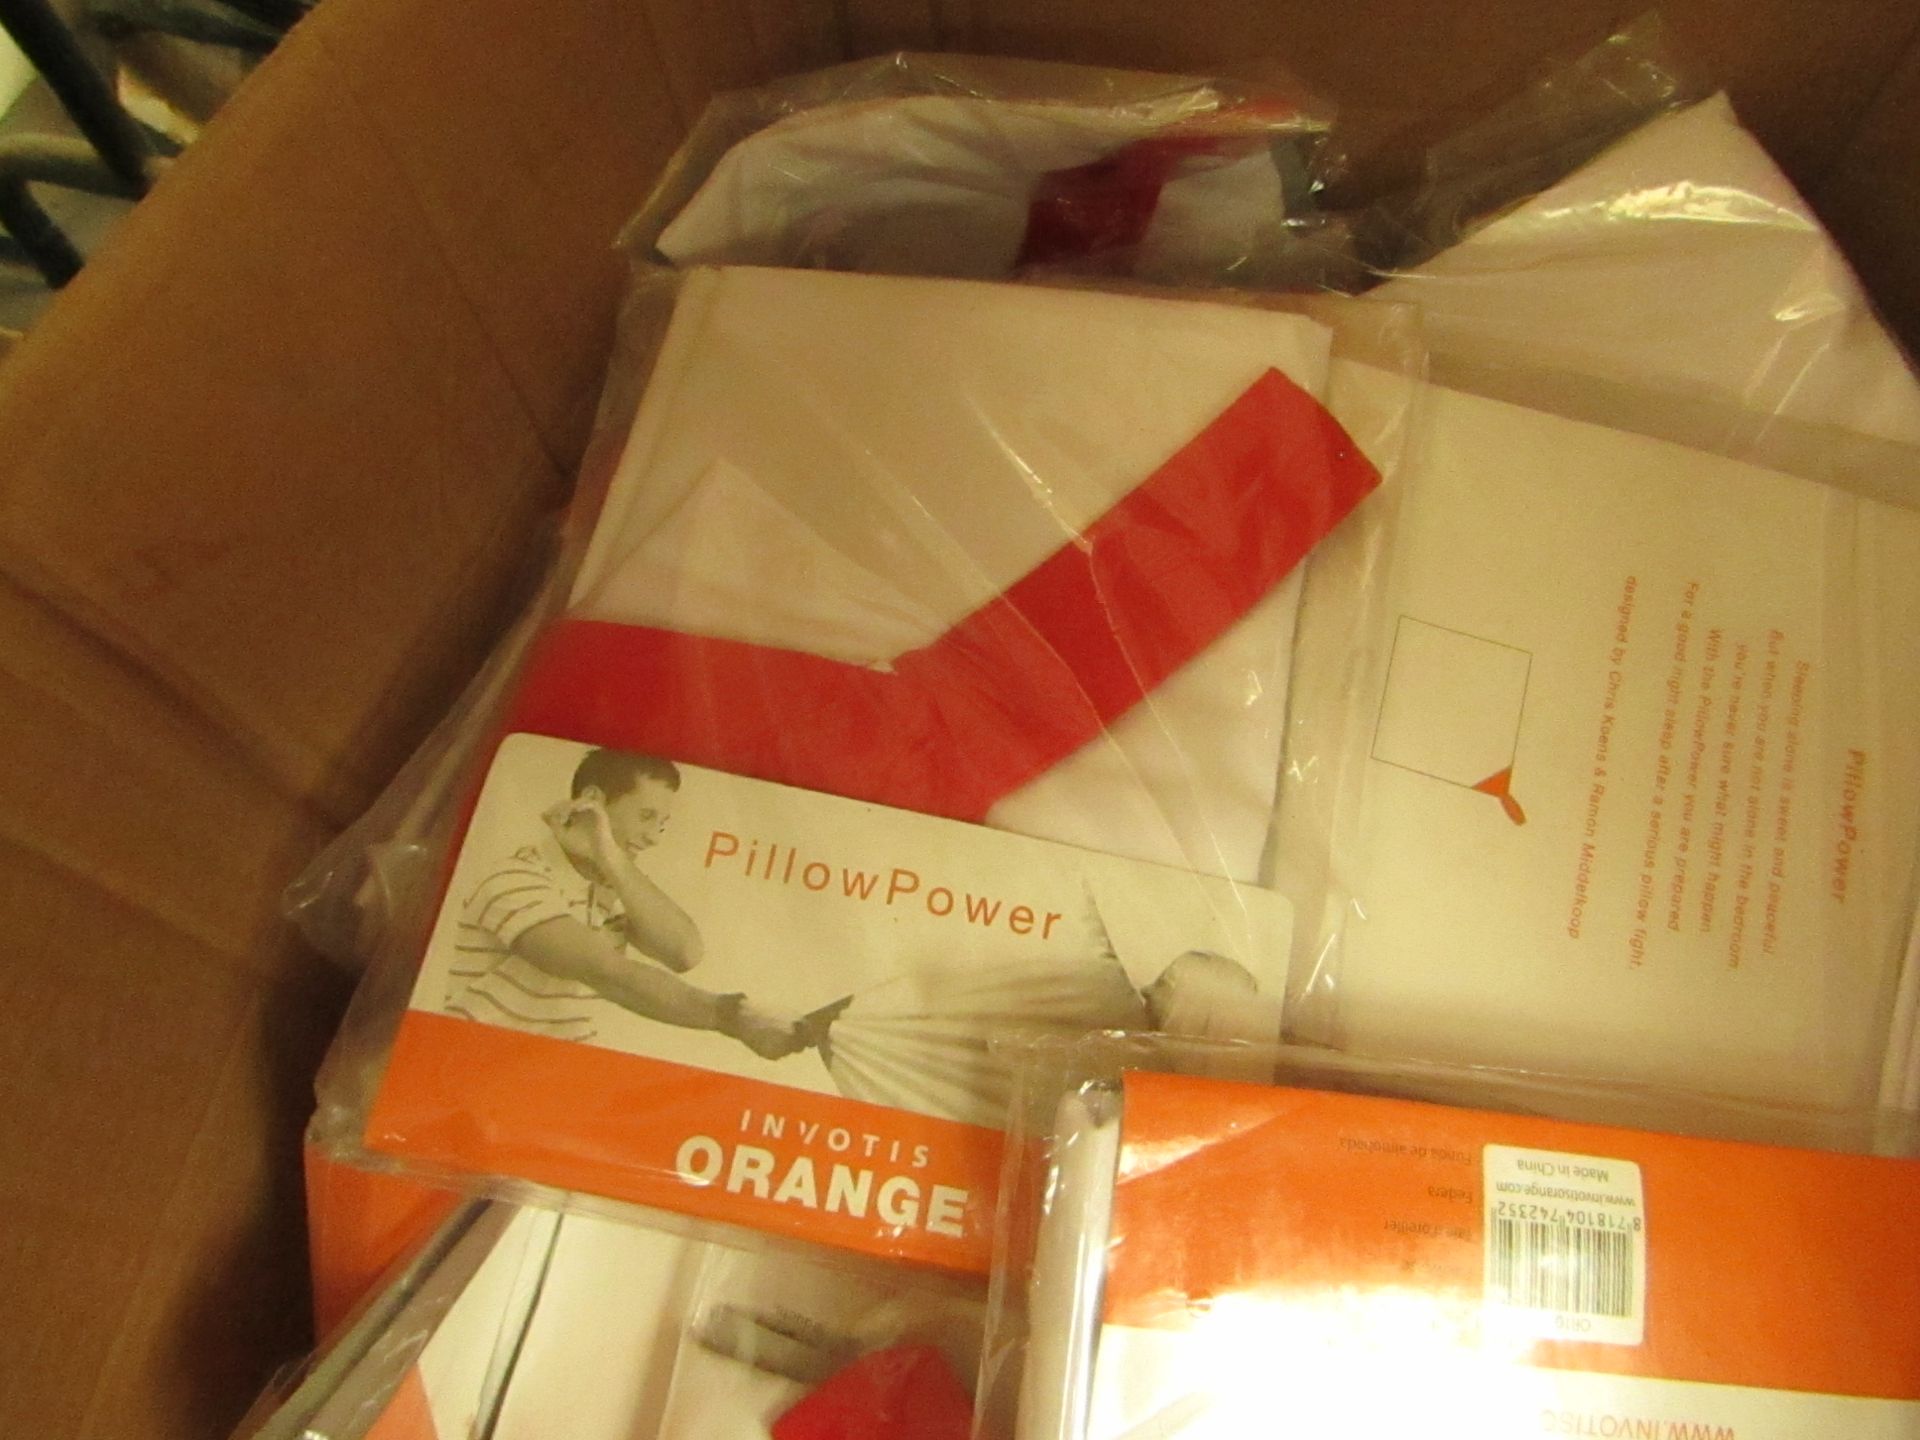 20 x Pillow Power cases for pillow Fights. Unused & Packaged